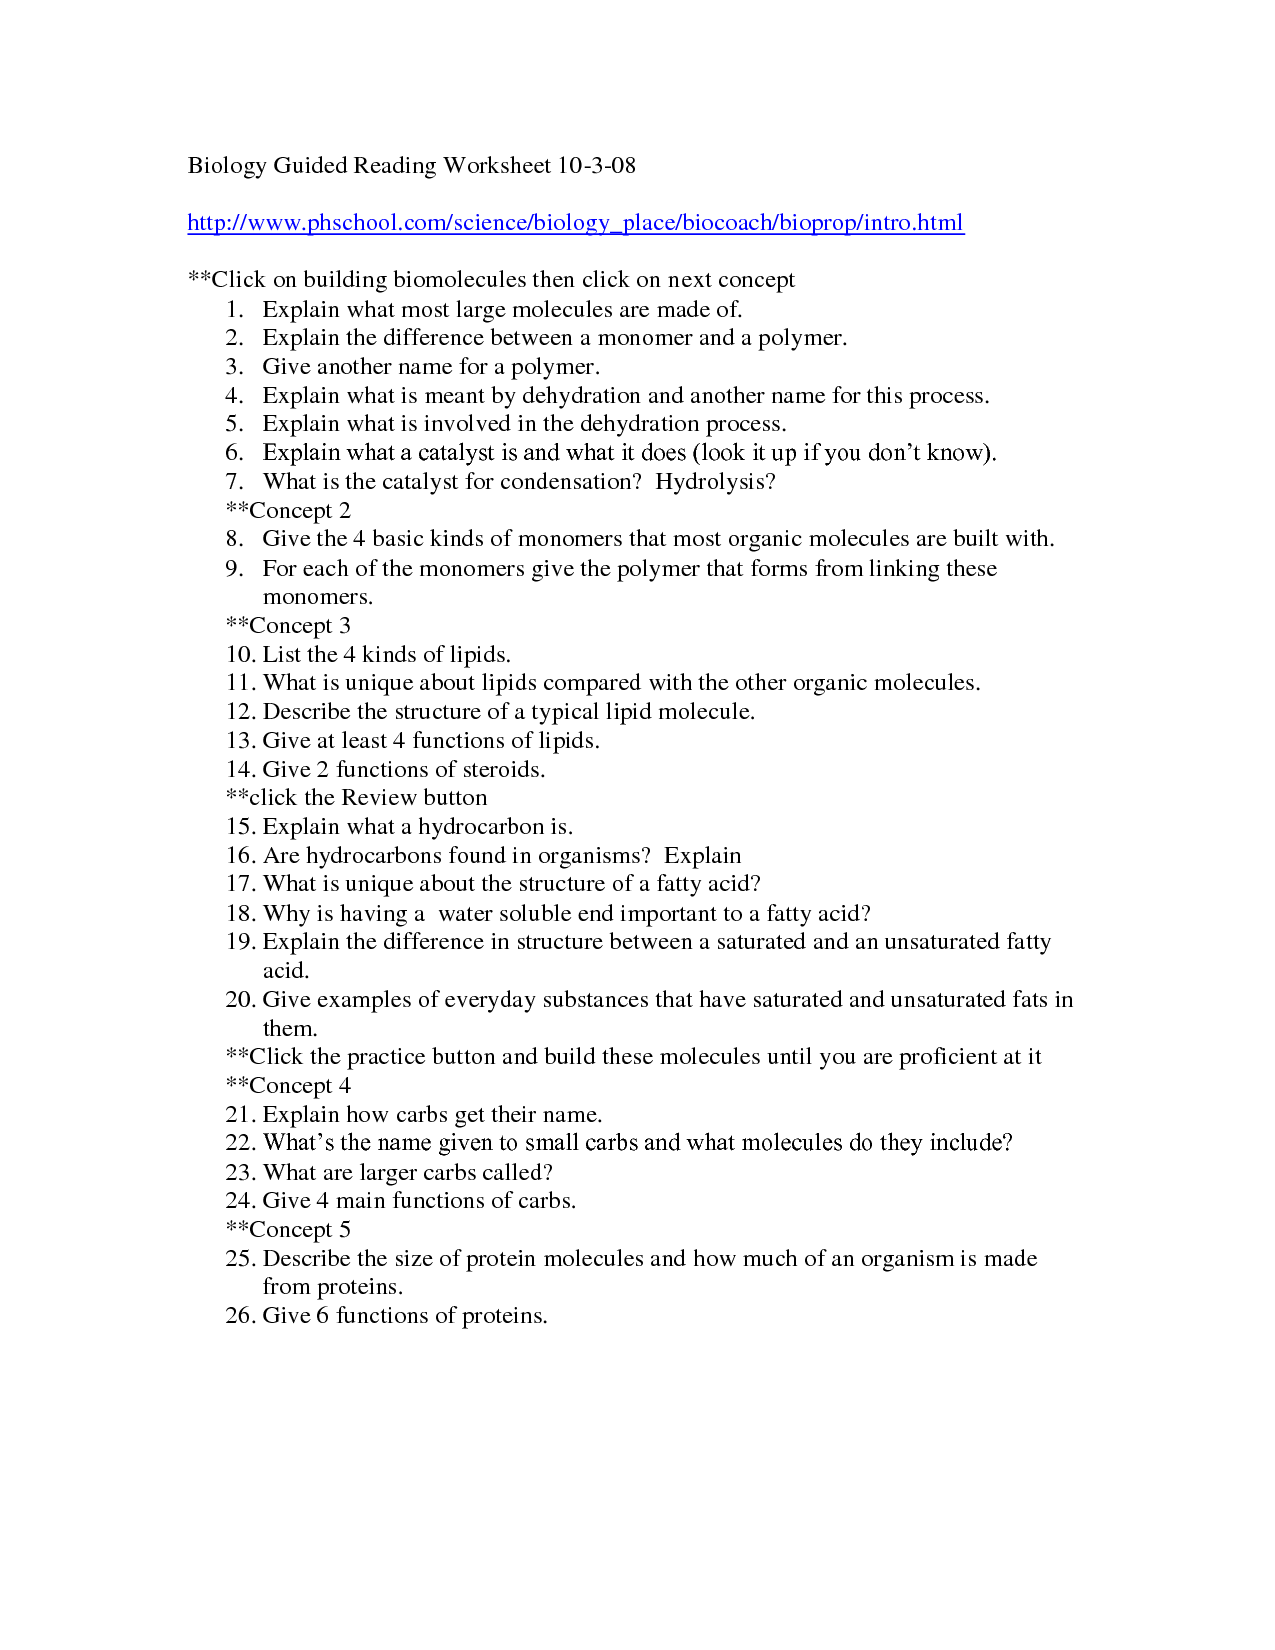 Pearson Education Biology Worksheet Answers Image